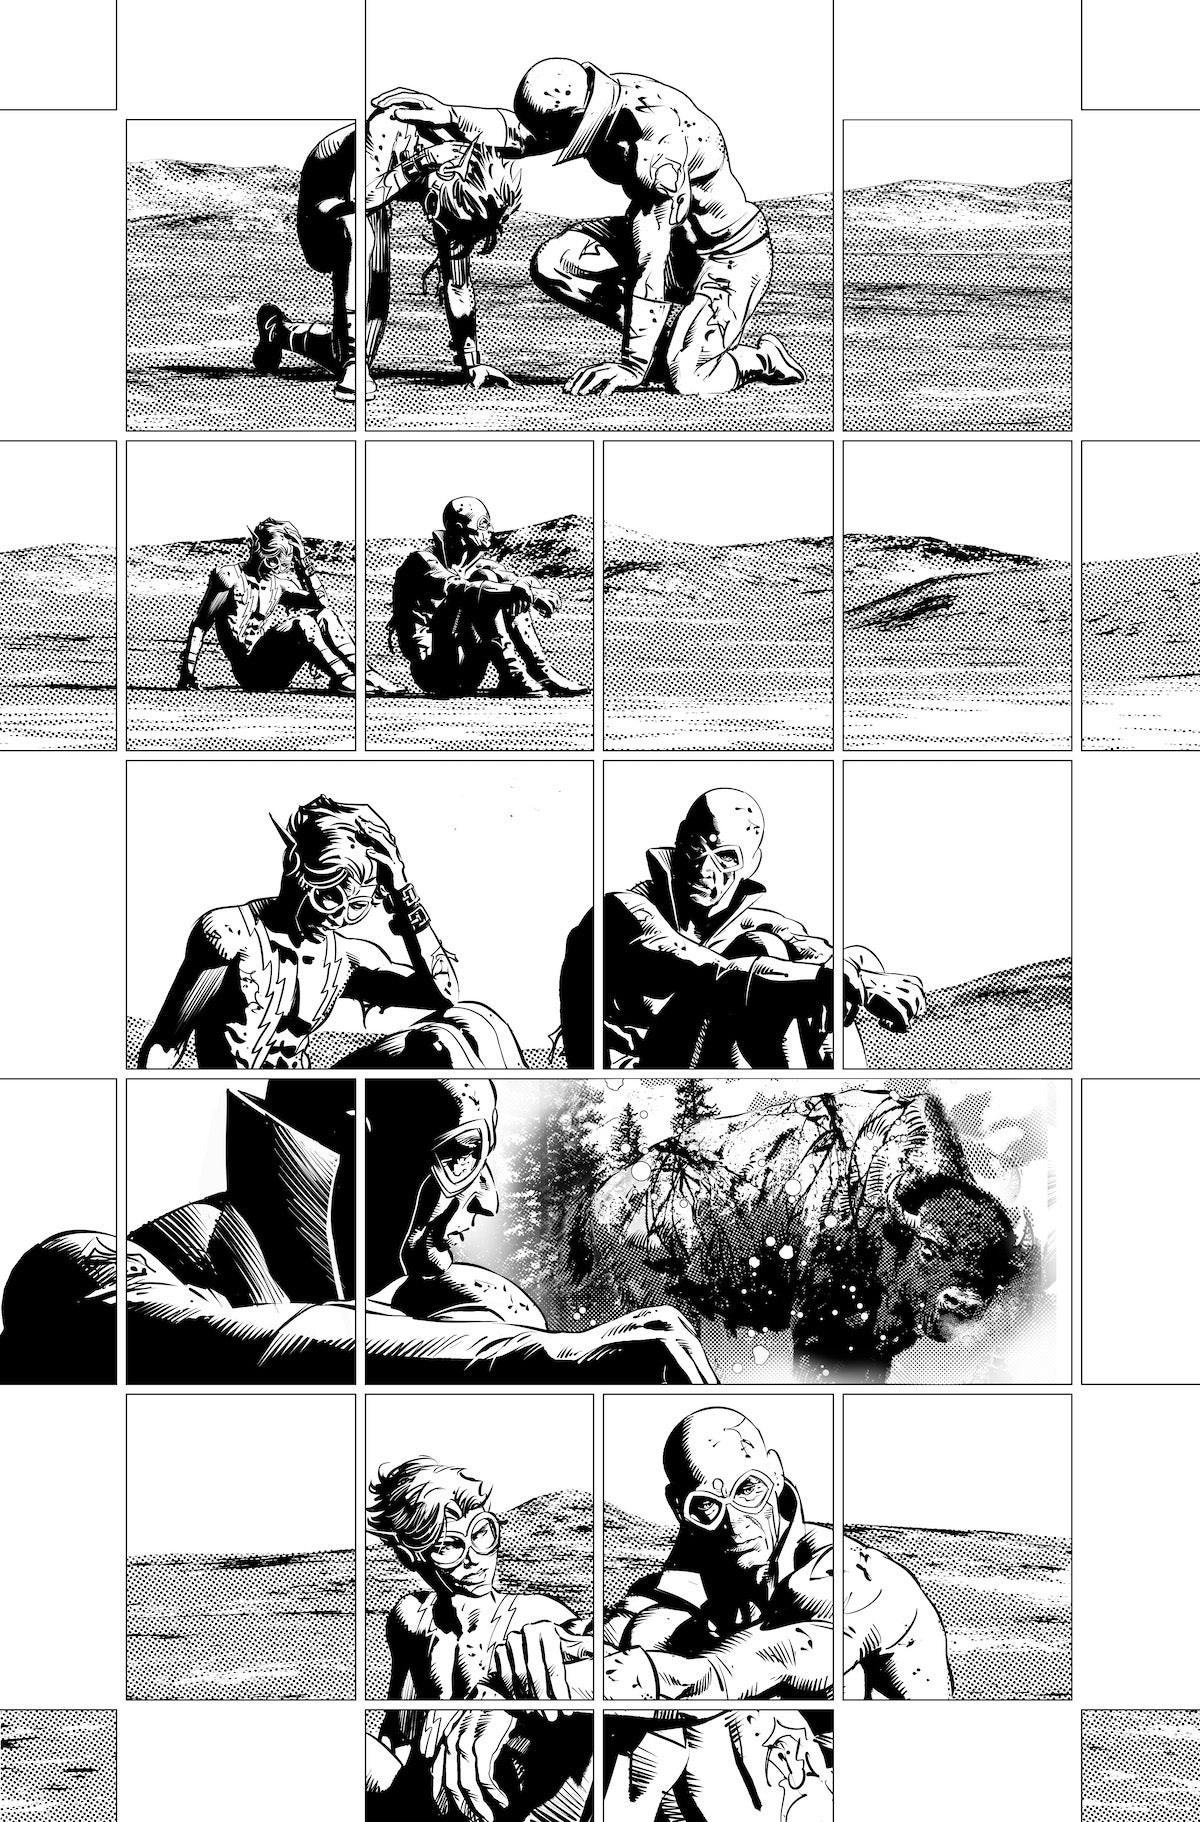 The Flash #1 interior art by Mike Deodato Jr.